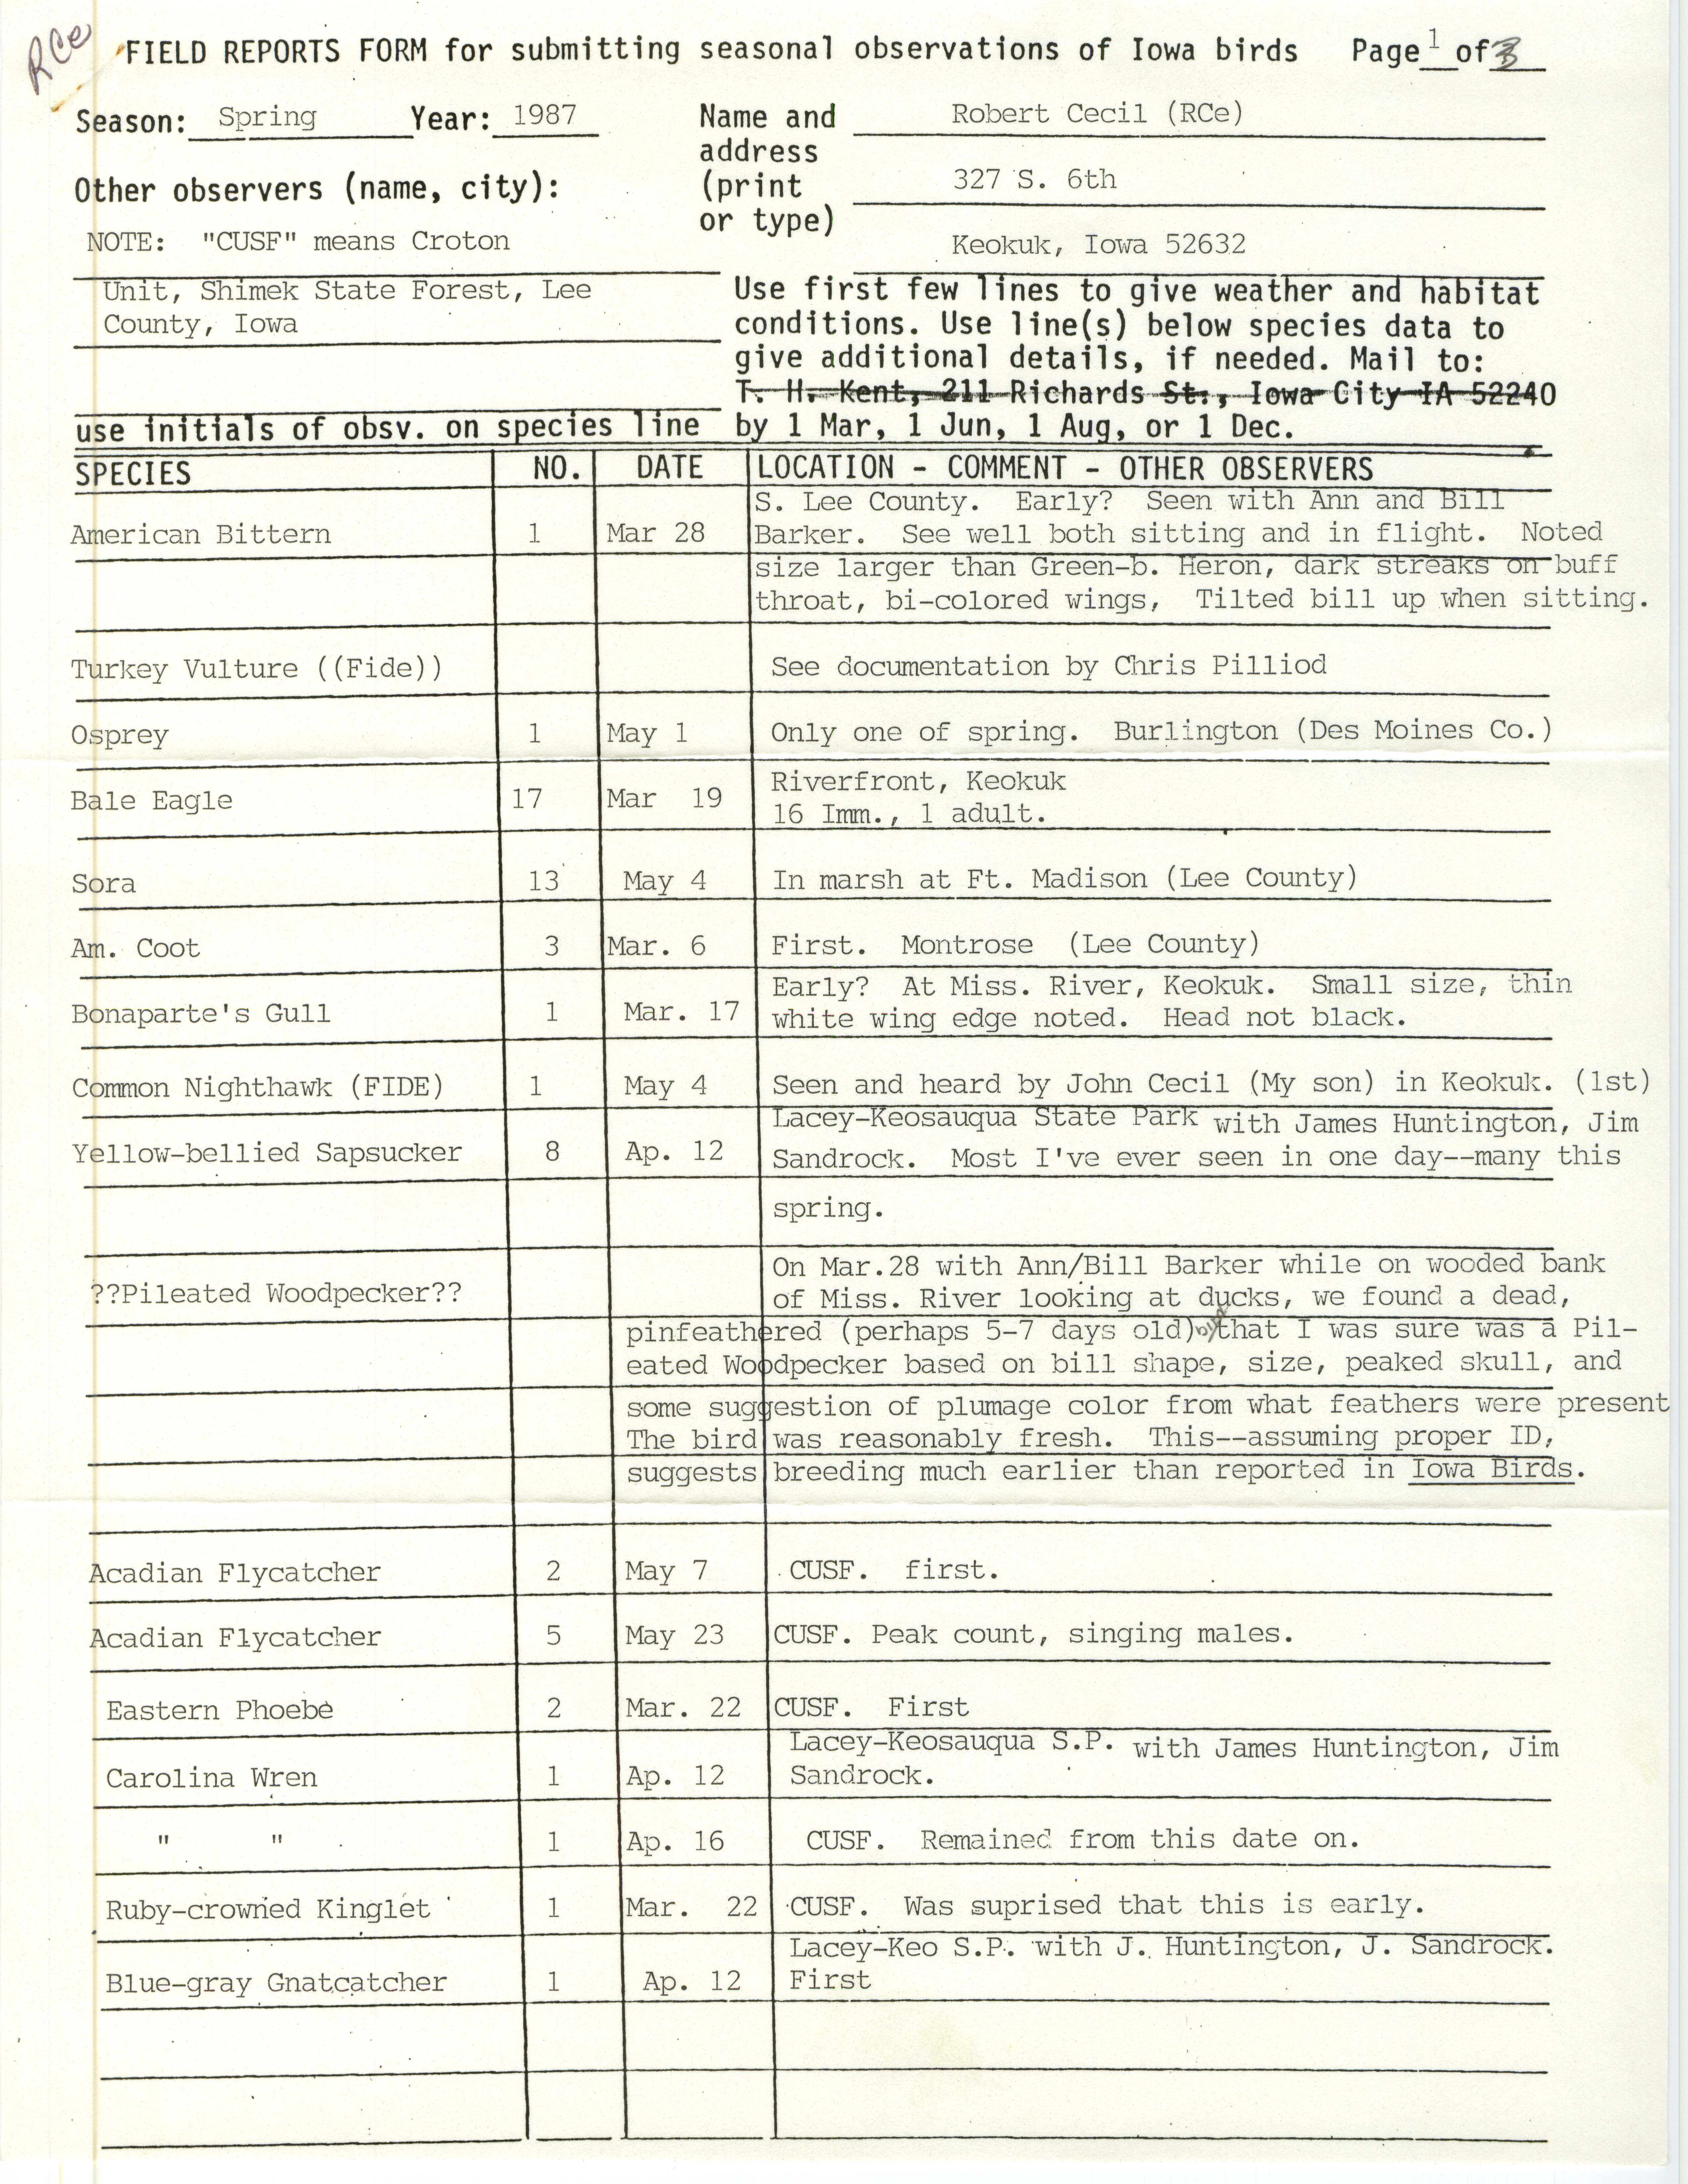 Field reports form for submitting seasonal observations of Iowa birds, Robert I. Cecil, spring 1987